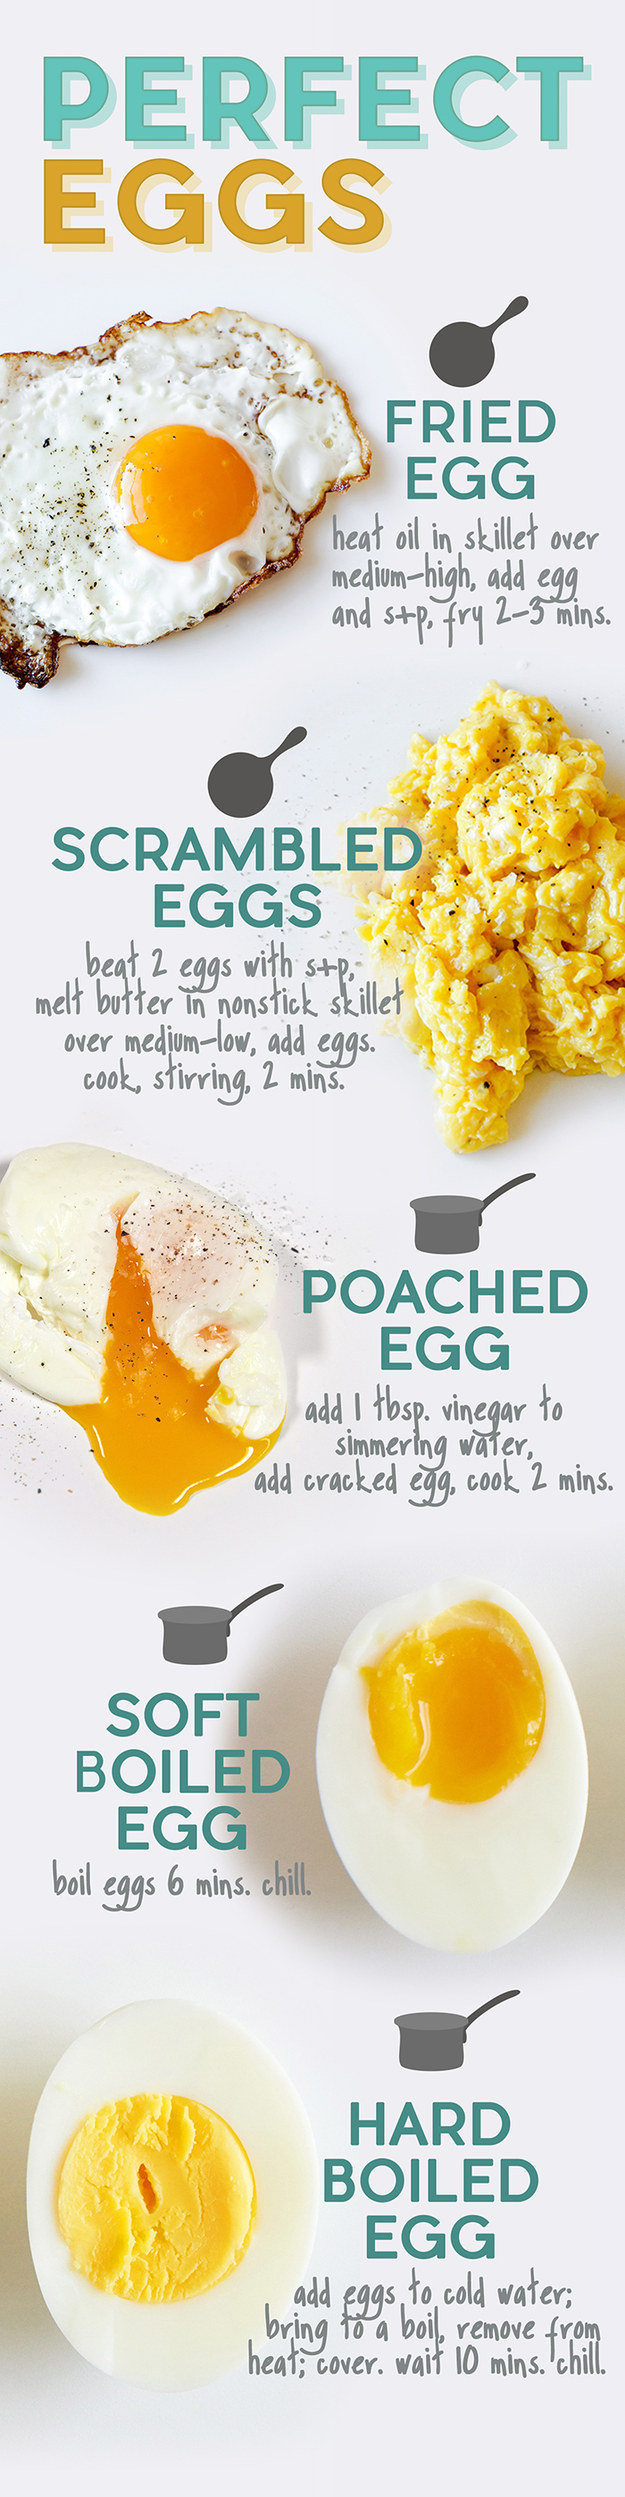 How To Make The Most Delicious Fried Egg Of Your Life